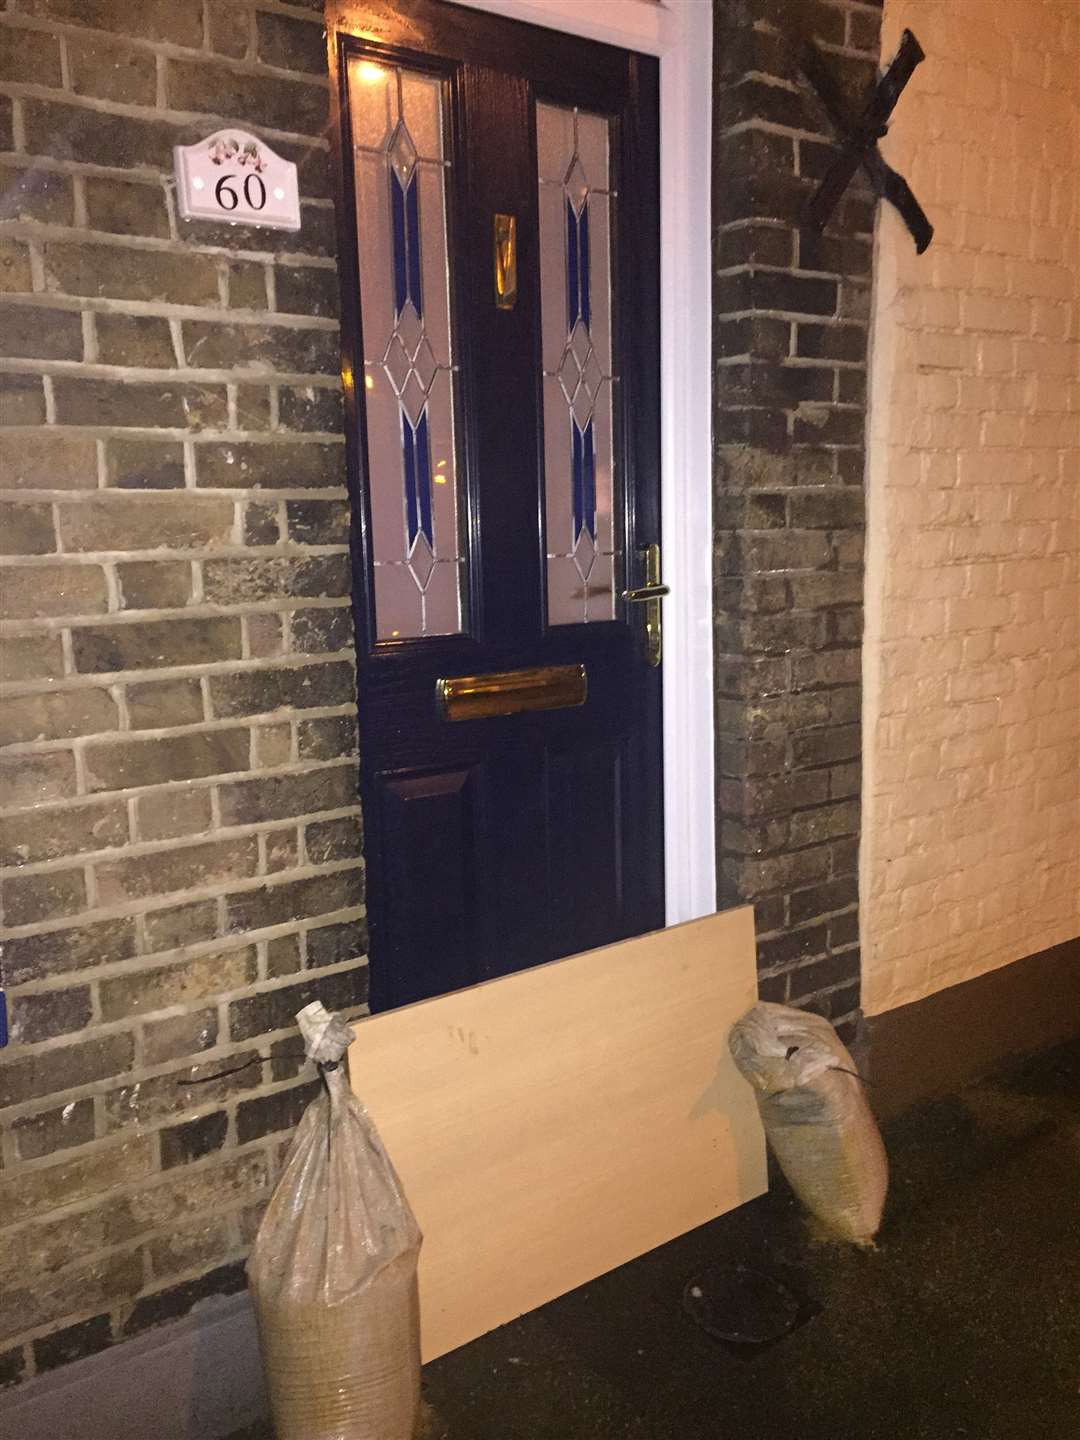 Residents protected their homes with boards and sandbags